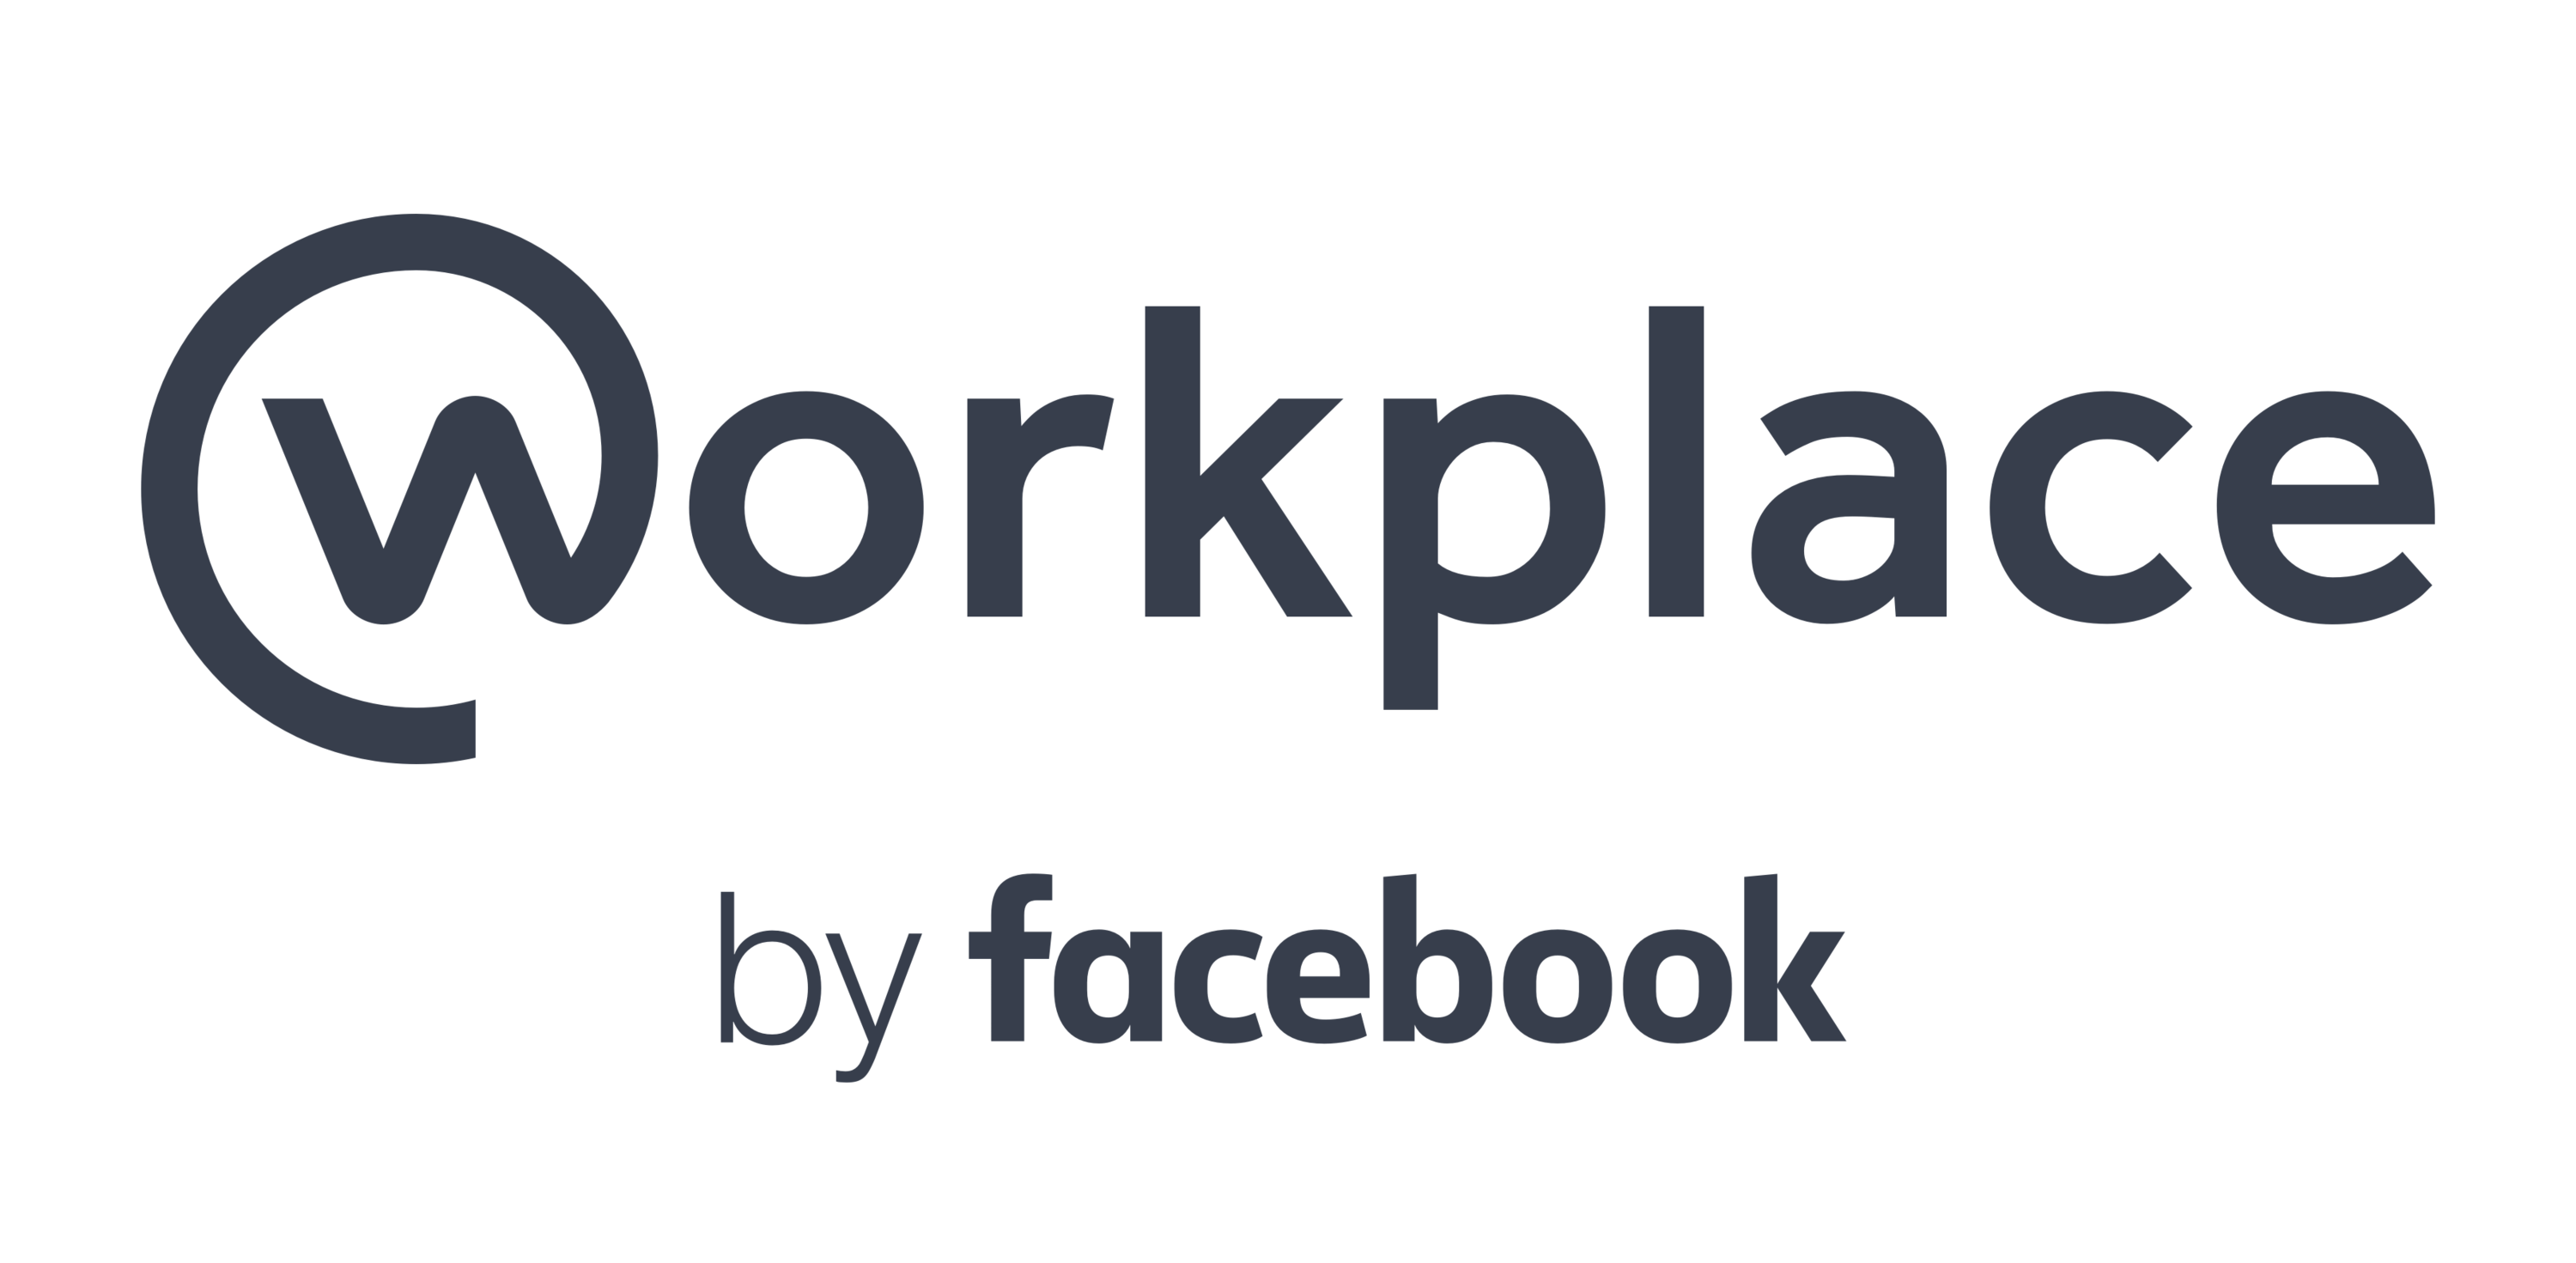 Workplace Logo - Download Product Brand Facebook Workplace Logo By HQ PNG Image